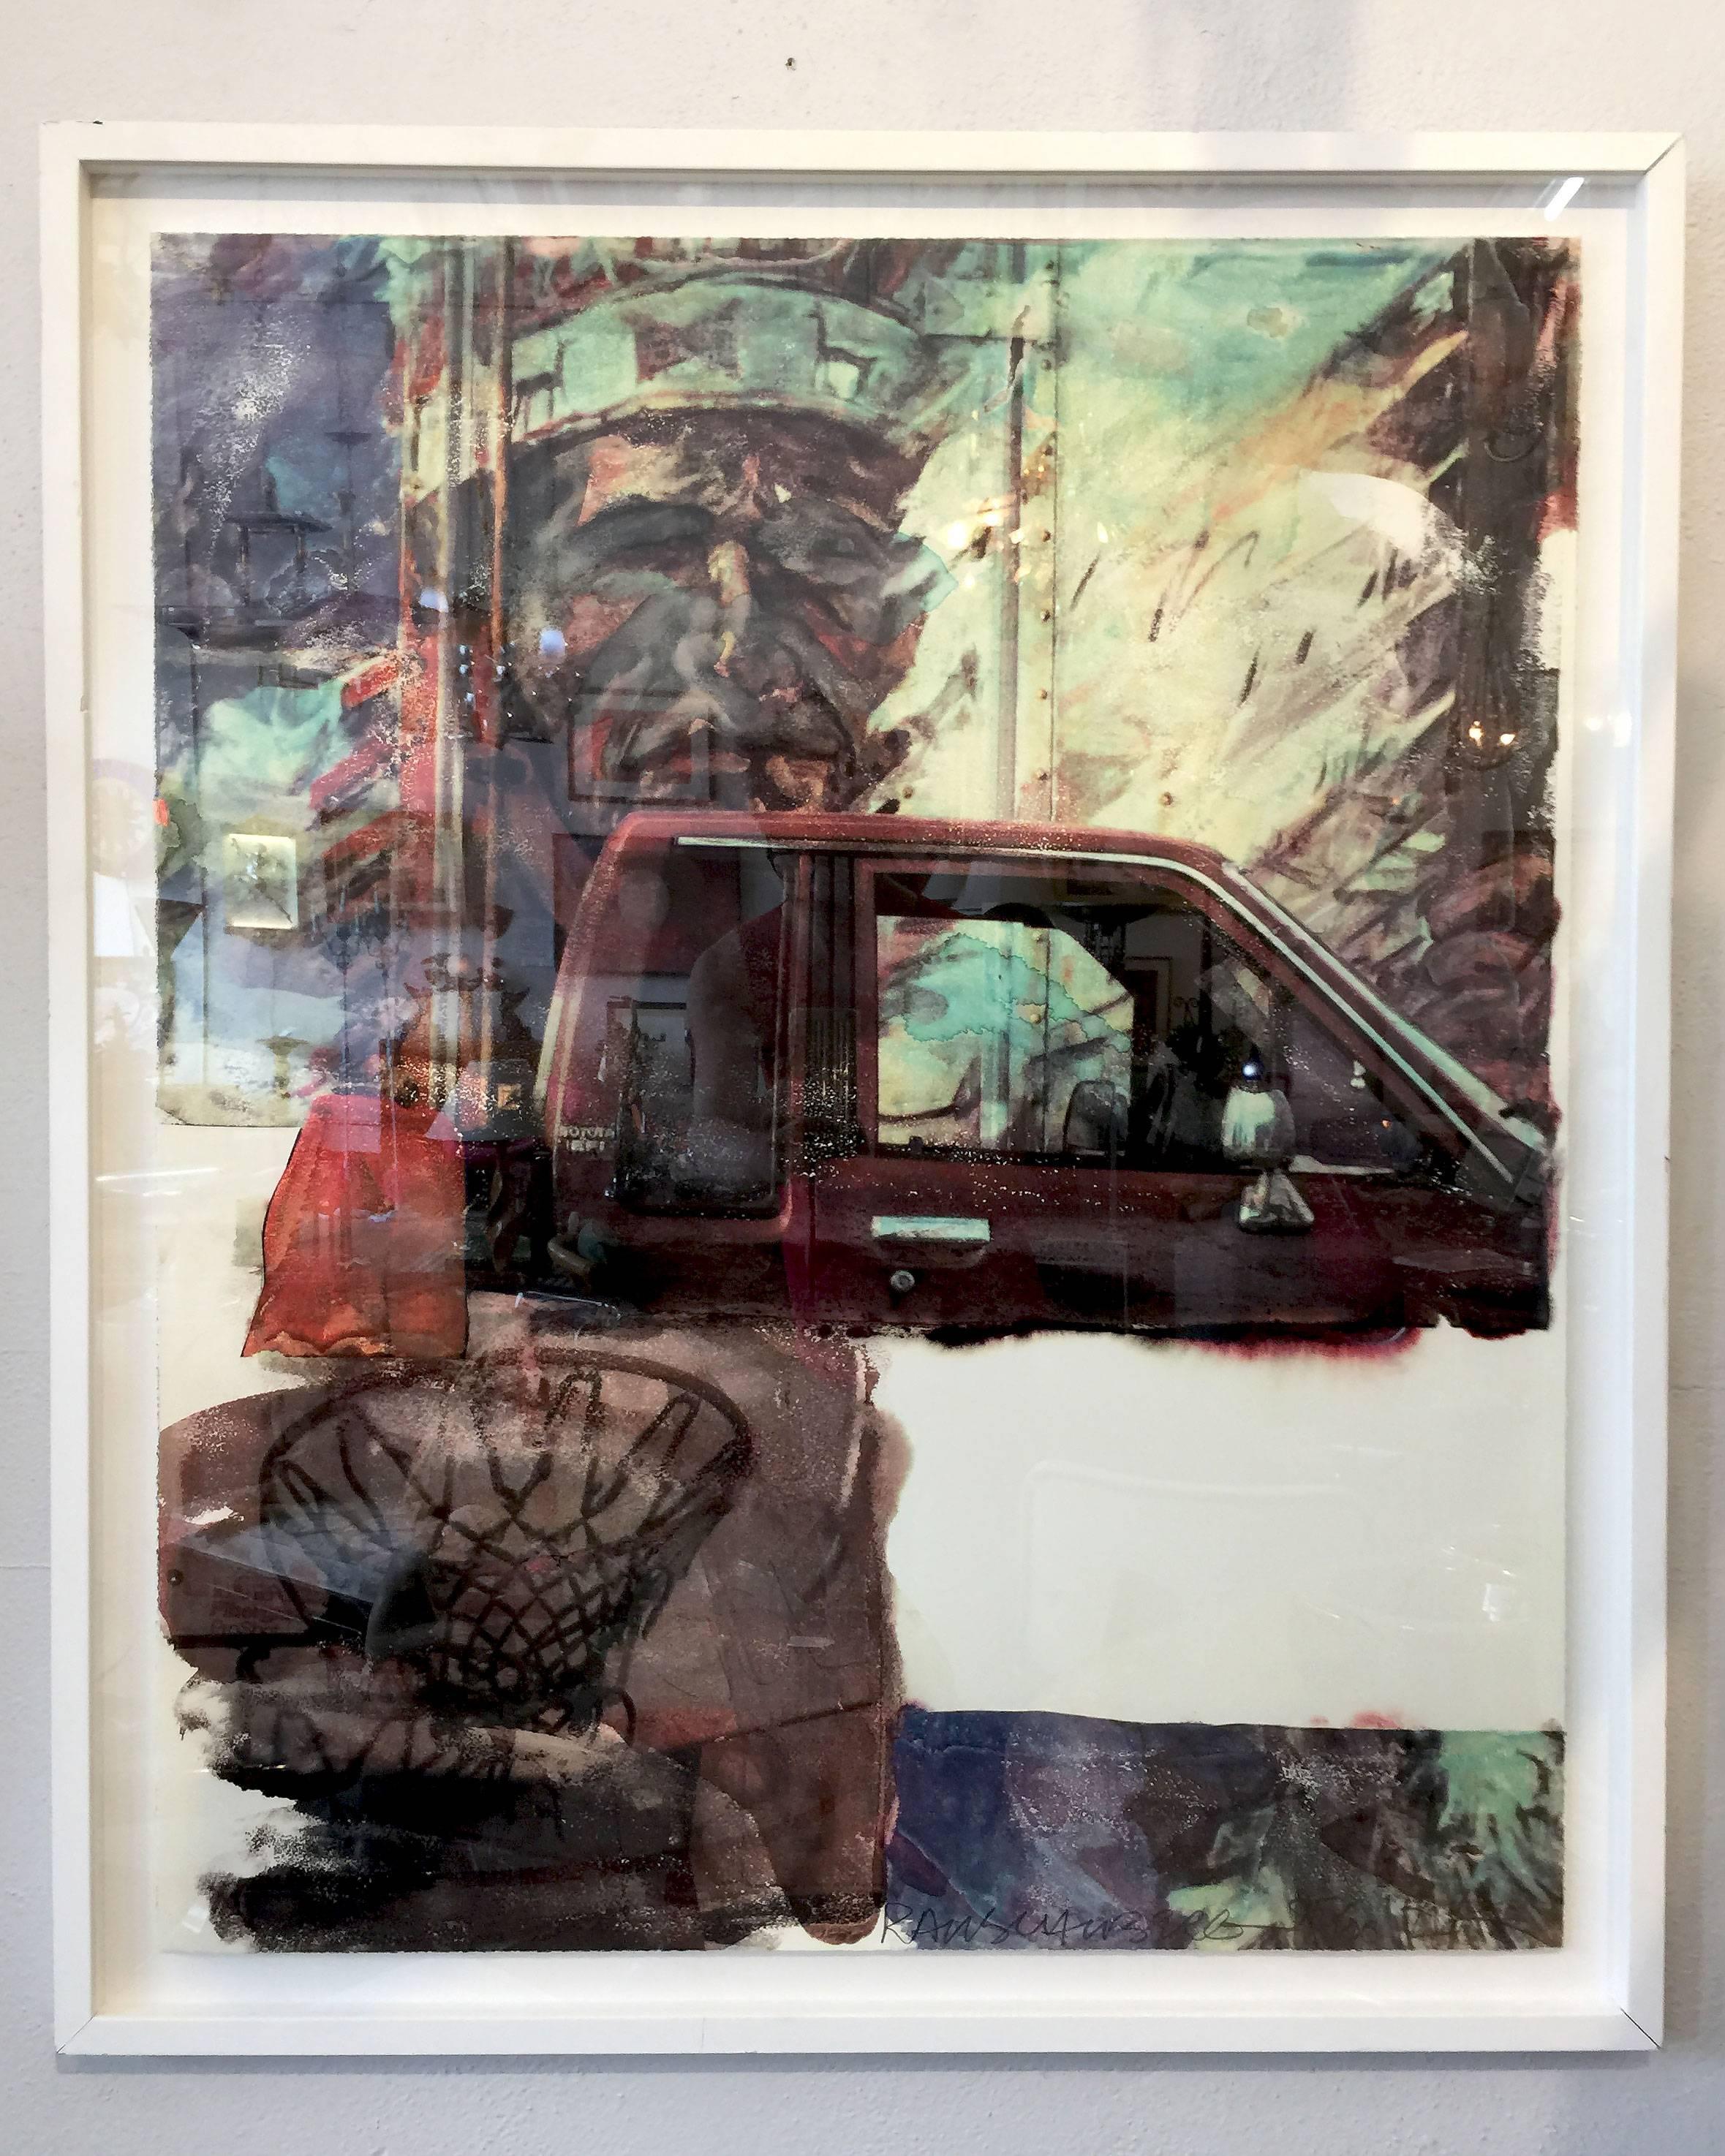 This item is 25% off in celebration of Harveys on Beverly's 50th Anniversary!

Robert Rauschenberg screen-print on Paper titled 